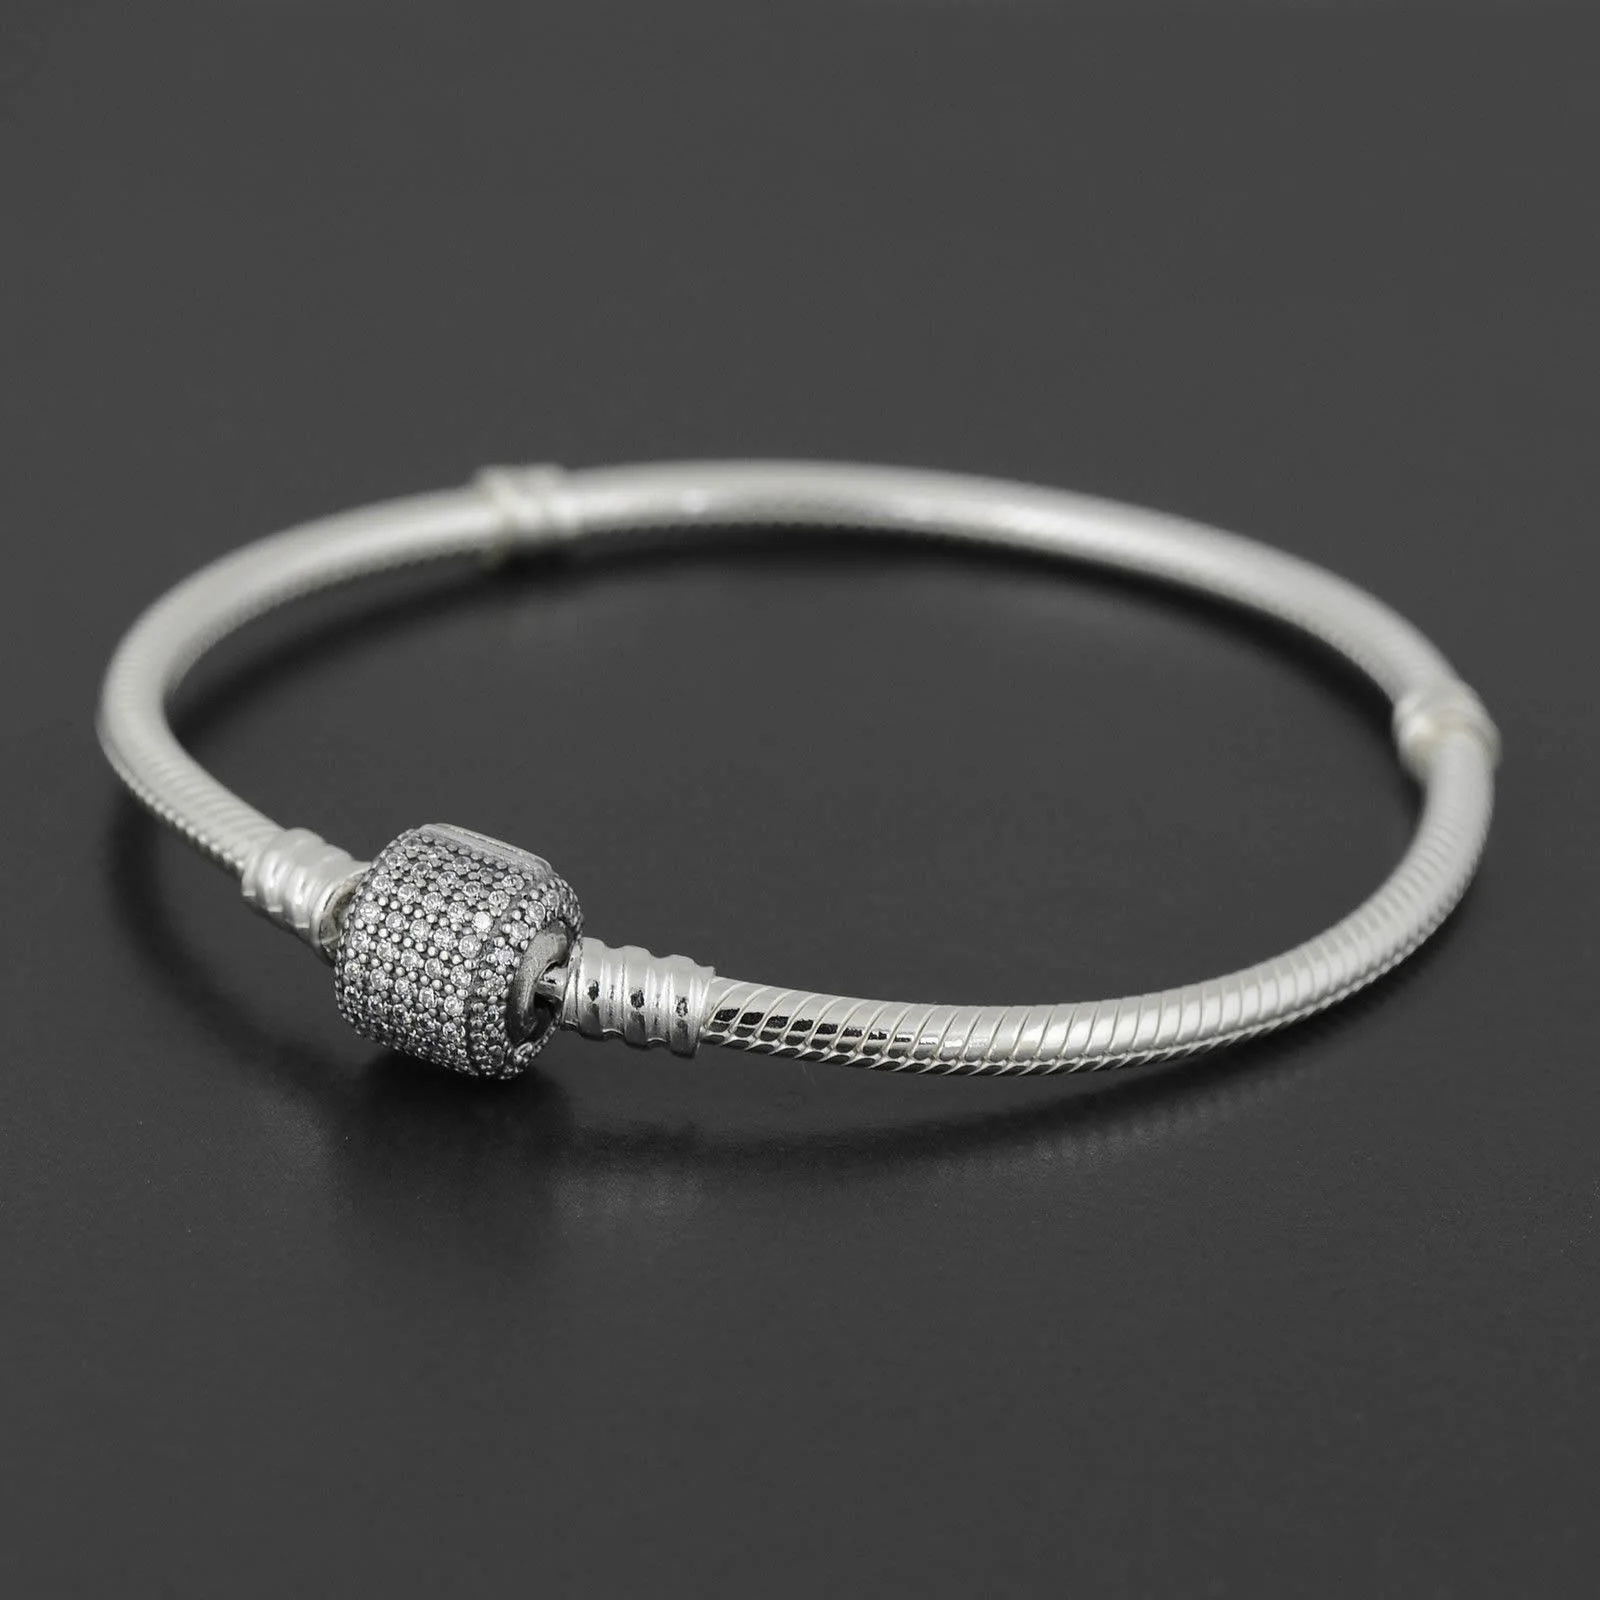 

Wholesale Authentic 925 Sterling Silver bracelet Bangle 1:1 with LOGO Engraved for European Charms Beads Women Jewelry